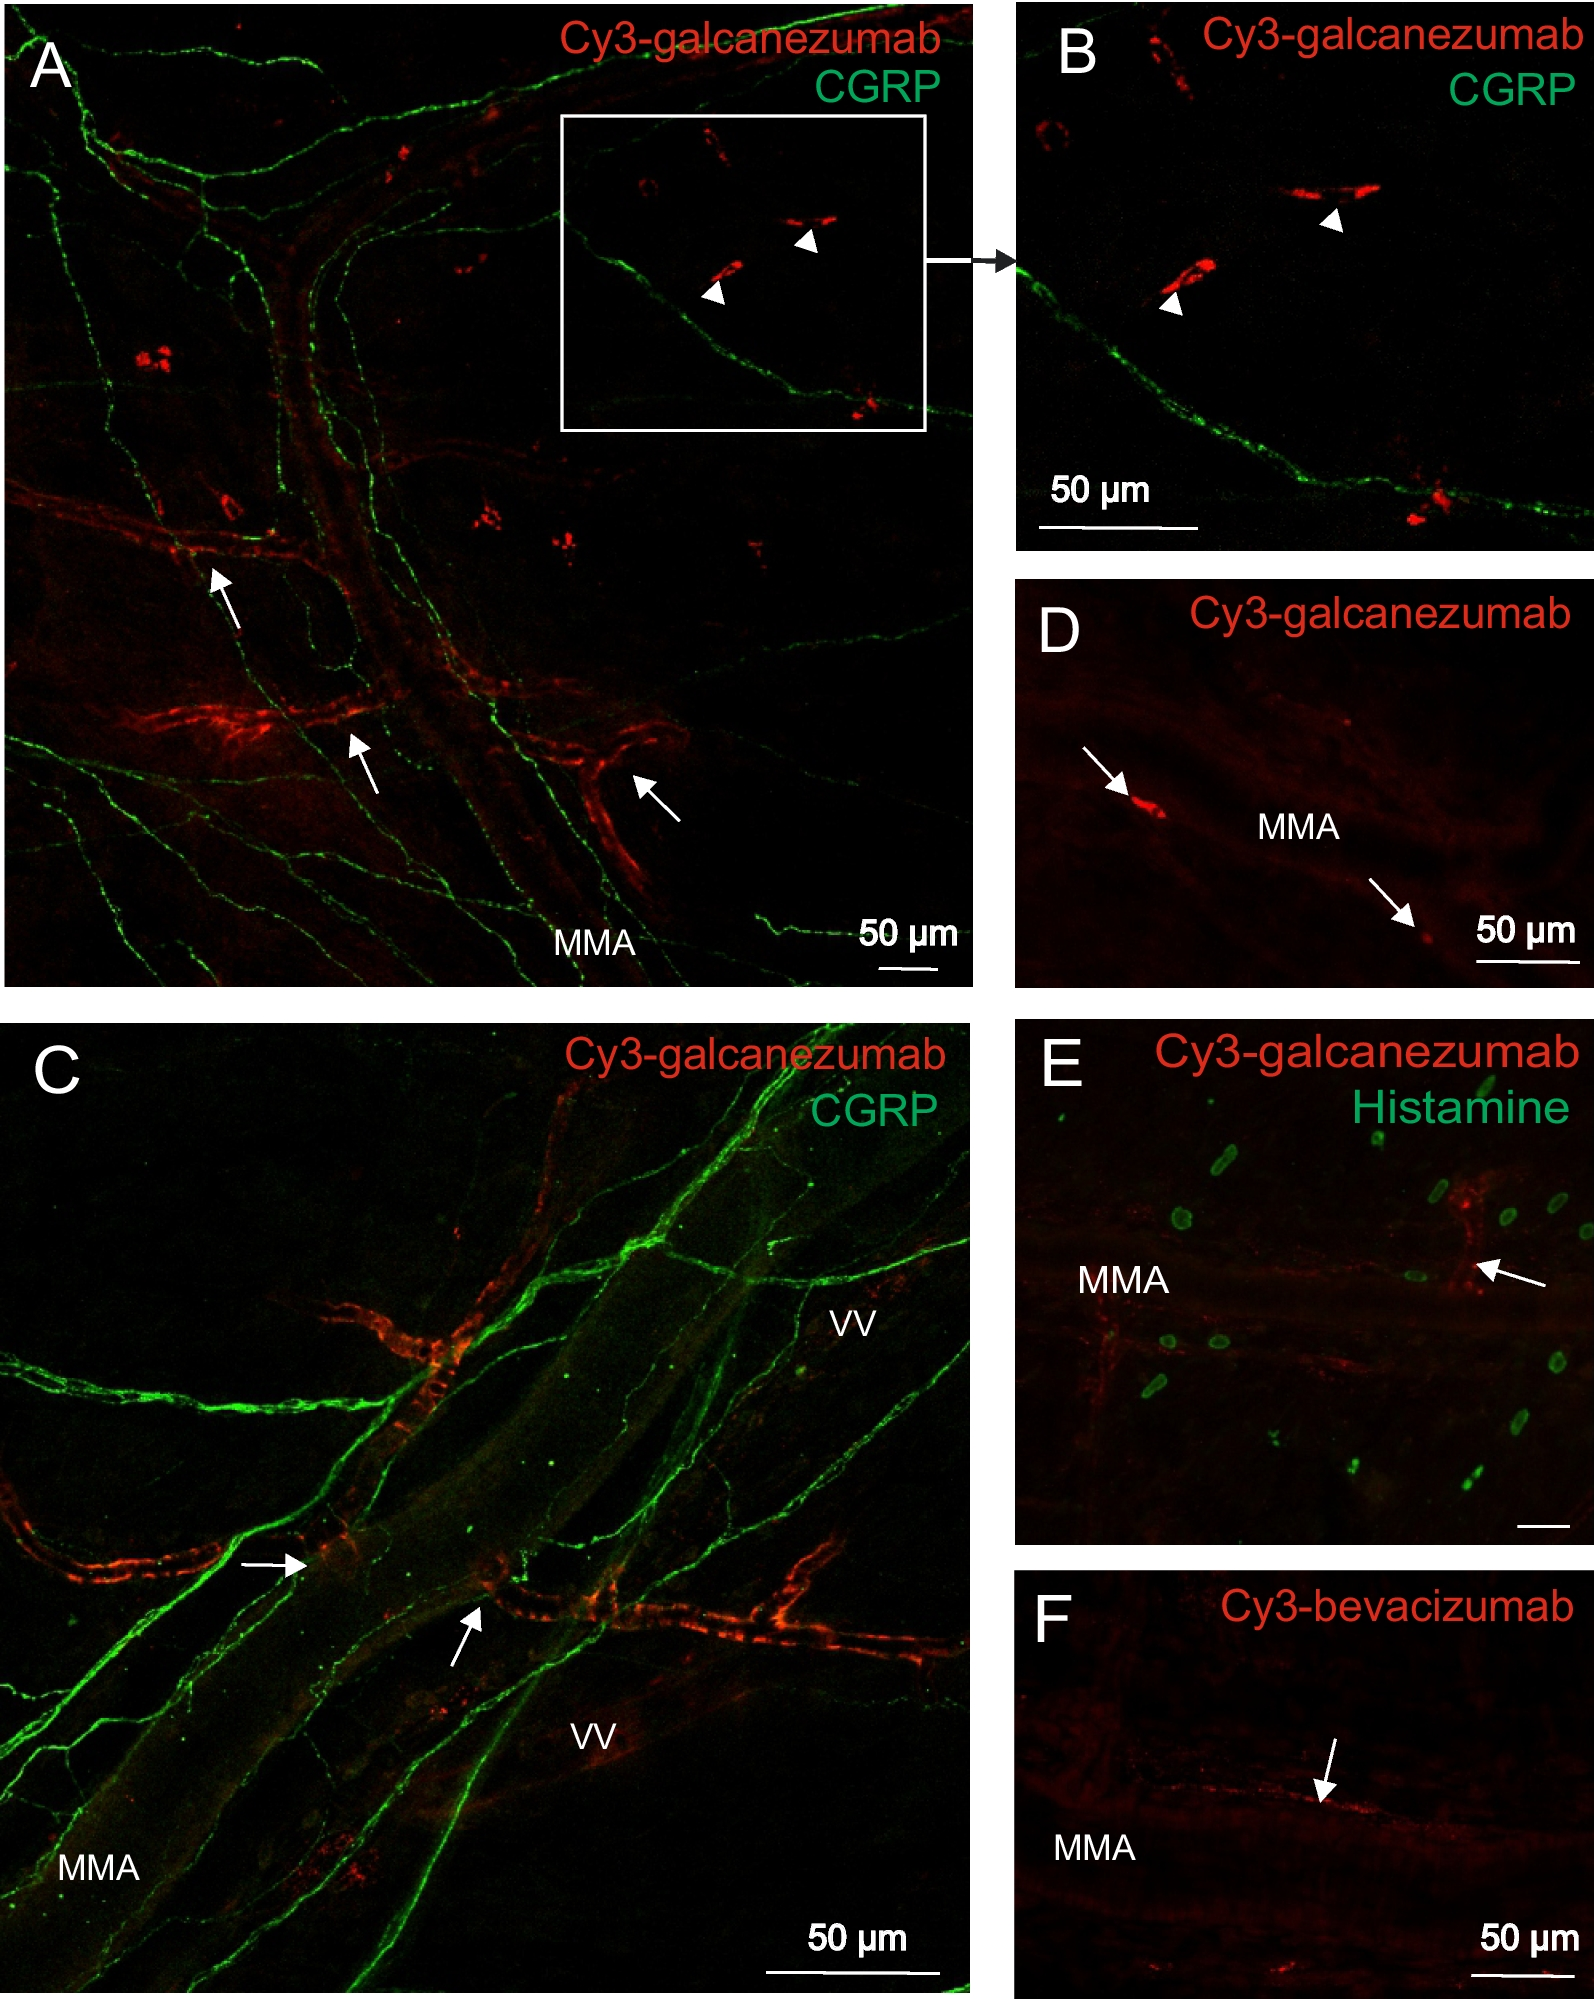 Anti-CGRP antibody galcanezumab modifies the function of the trigeminovascular nocisensor complex in the rat